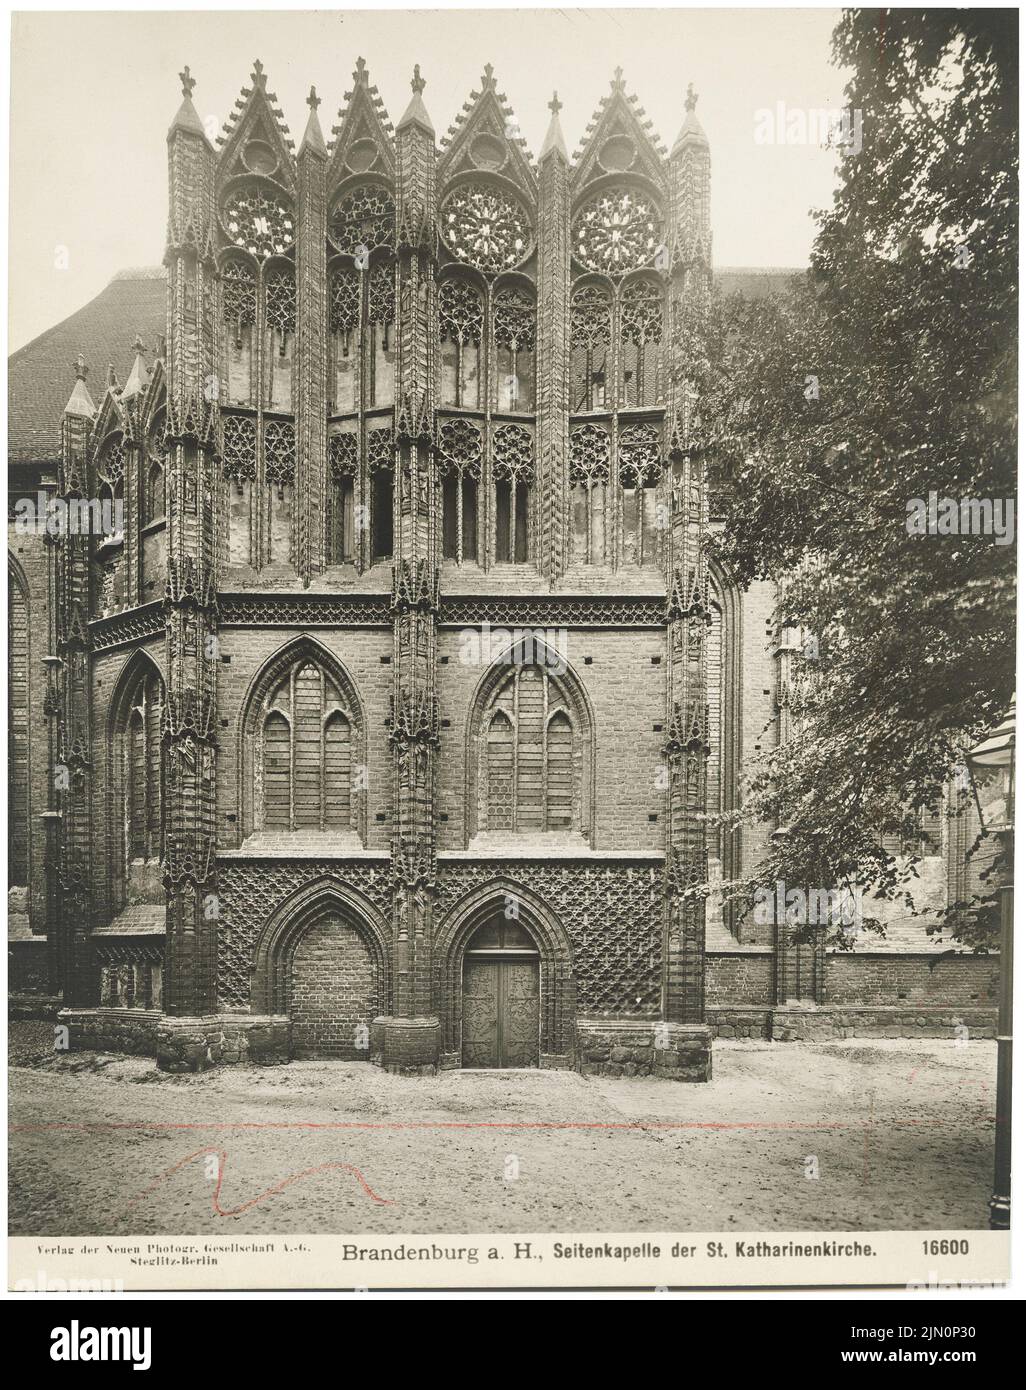 New photographic society (NPG), St. Katharinenkirche, Brandenburg/Havel (without dat.): Side chapel from outside. Photo, 24.8 x 19.6 cm (including scan edges) Neue Photographische Gesellschaft (NPG): St. Katharinenkirche, Brandenburg/Havel (ohne Dat.) Stock Photo